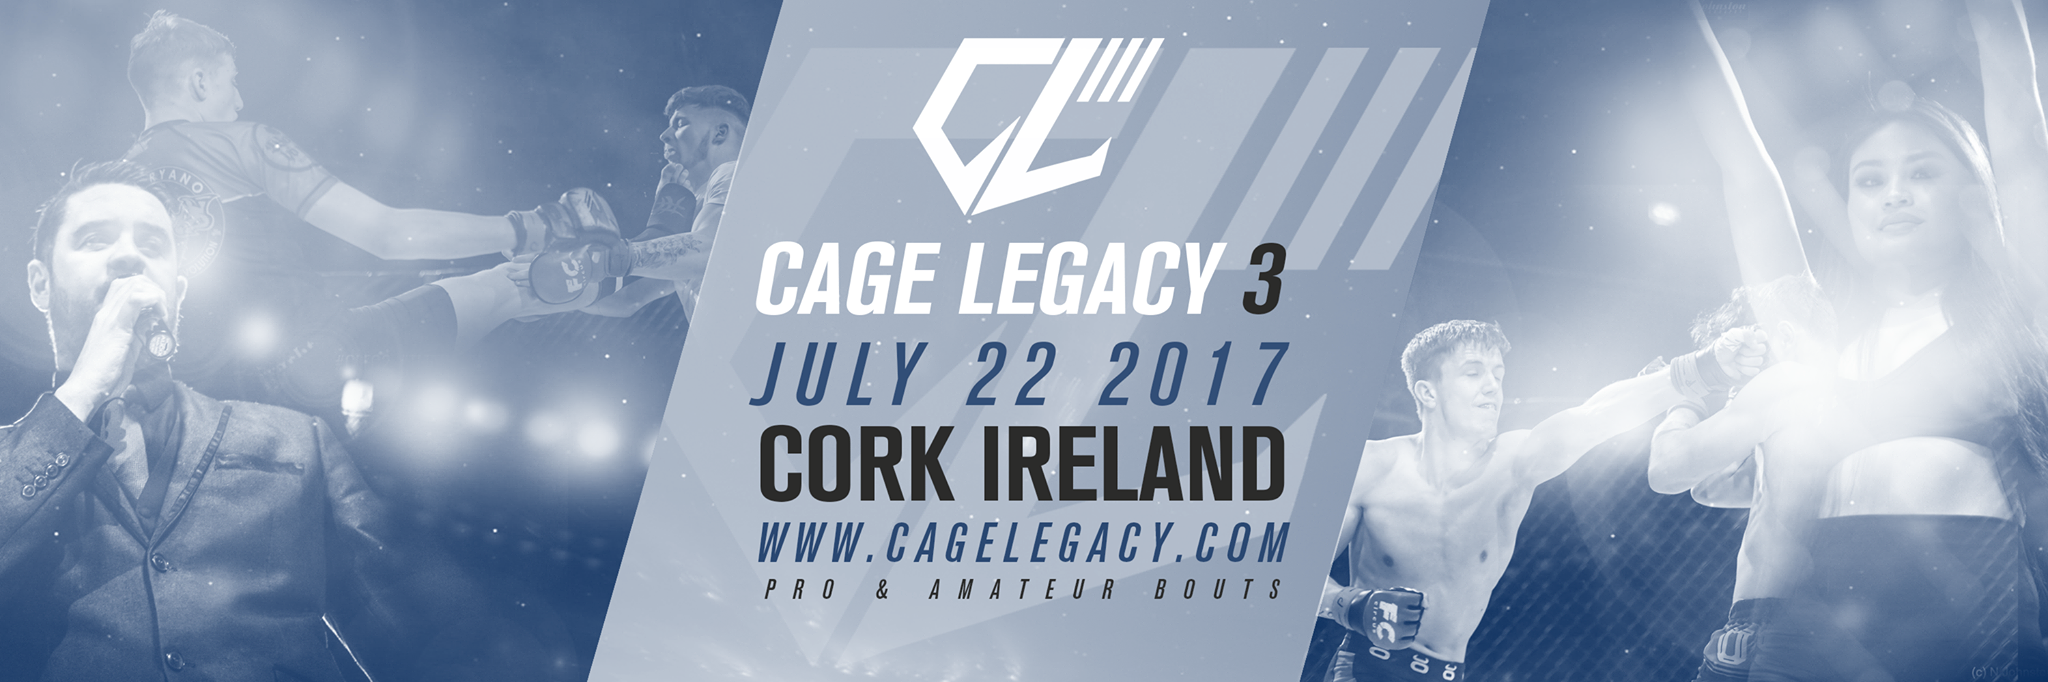 cage legacy 3 cork